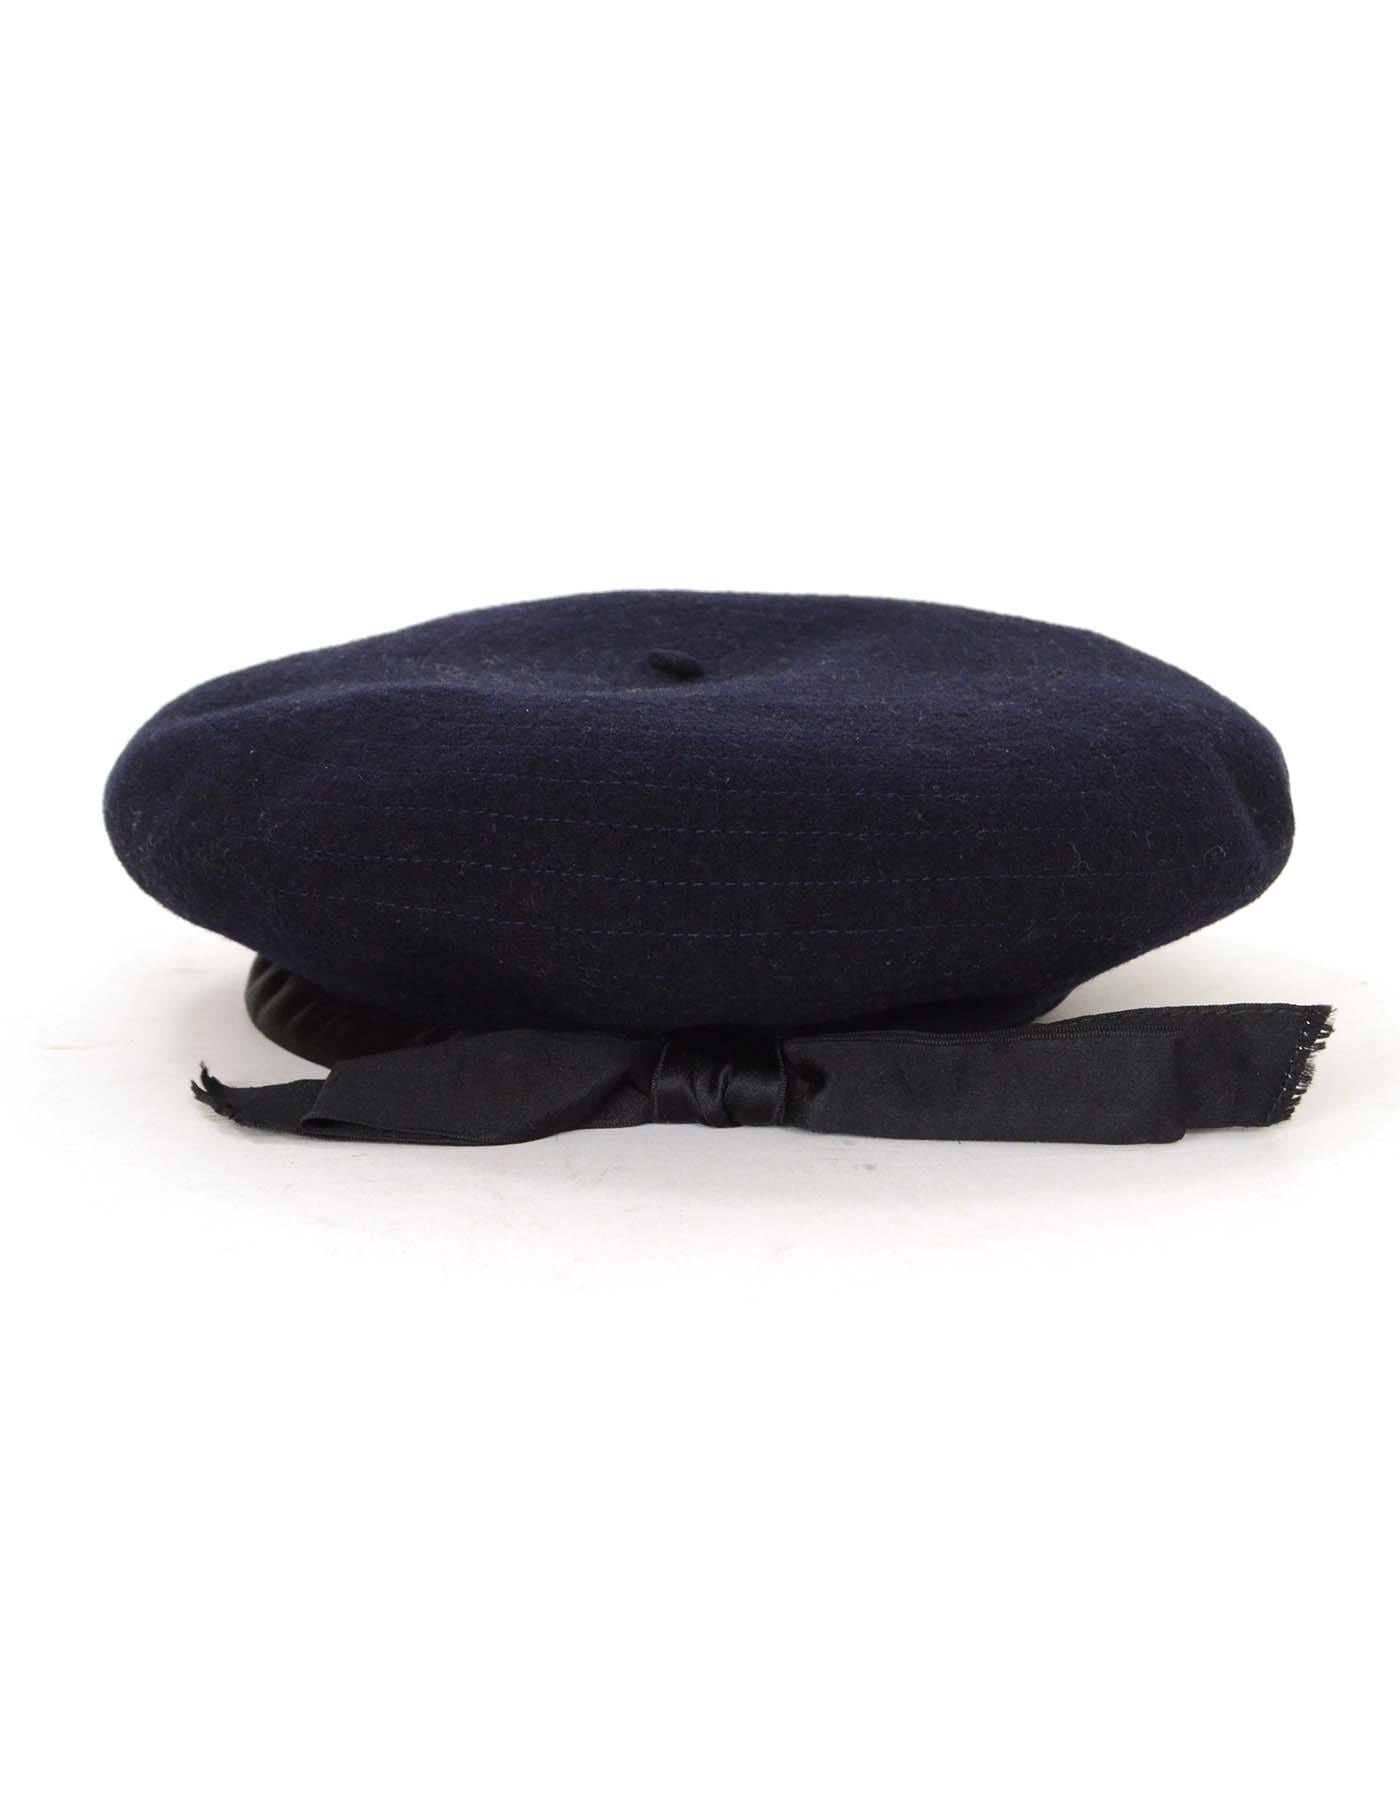 Chanel Vintage '70s Navy Wool Beret Hat 
Features black bow ribbon trim detail

Color: Navy and black 
Composition: Wool 
Lining: None
Overall Condition: Excellent pre-owned vintage condition with the exception fraying of bow detail, missing